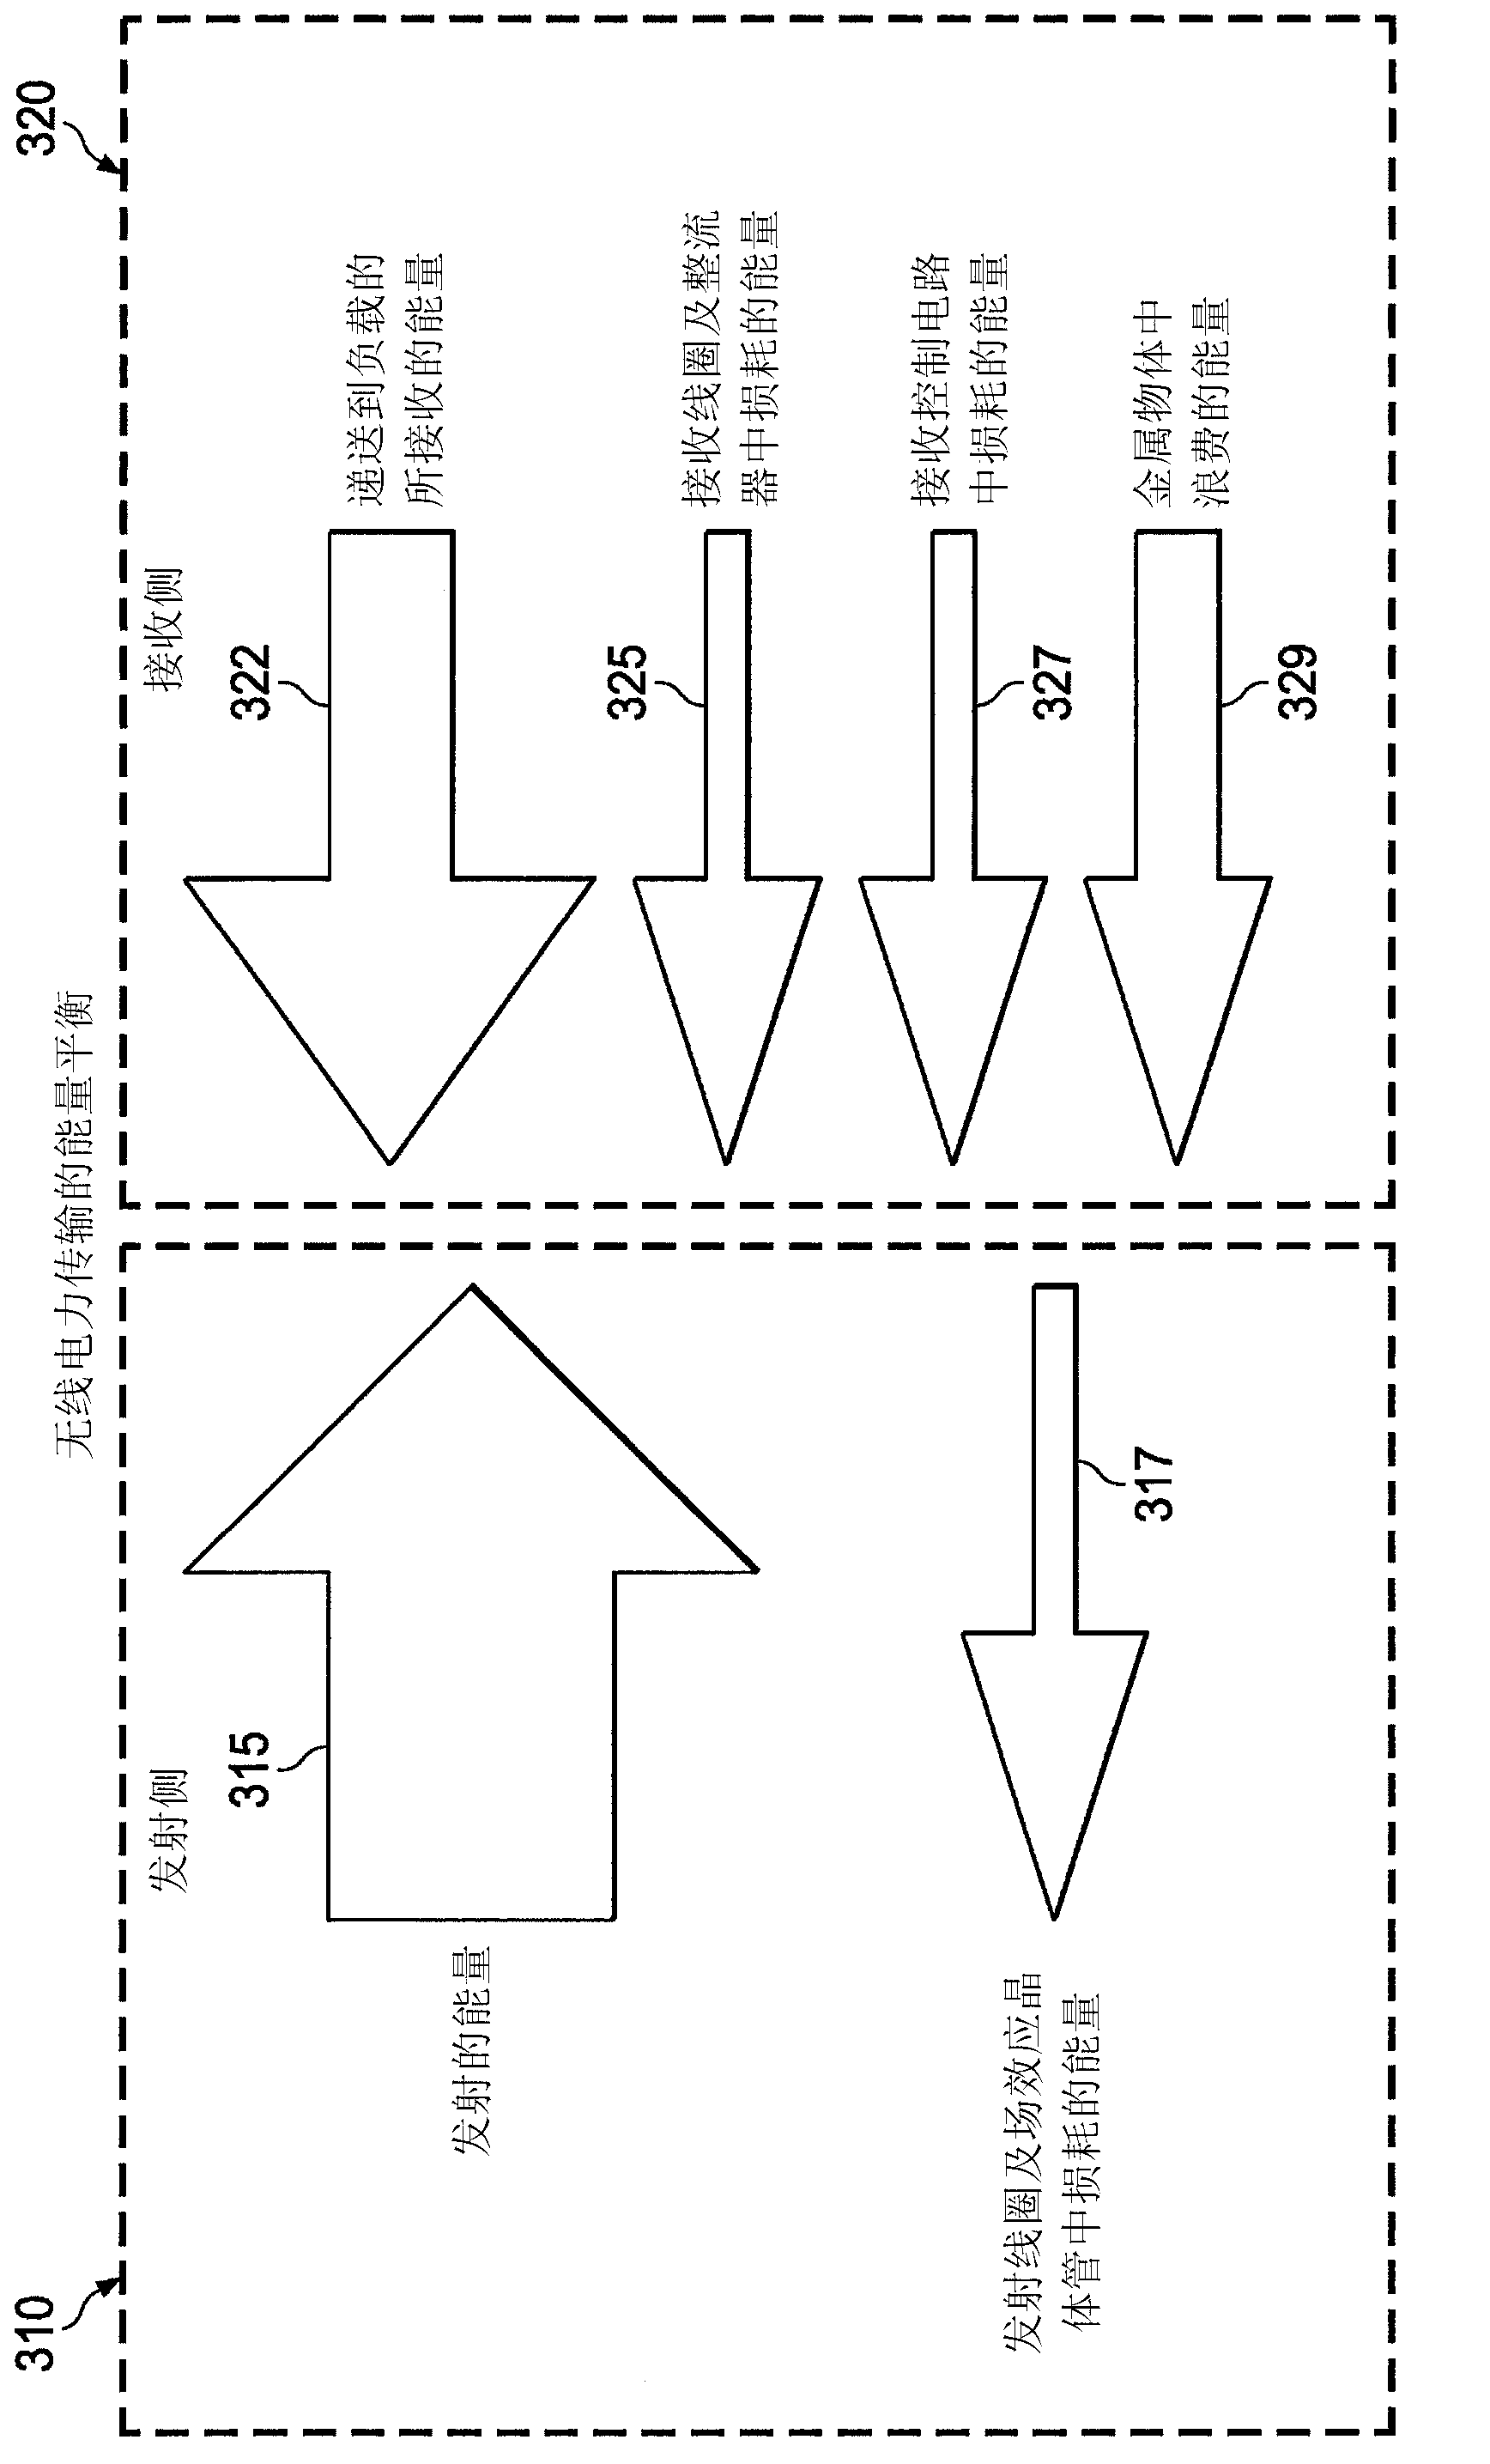 Systems and methods of wireless power transfer with interference detection